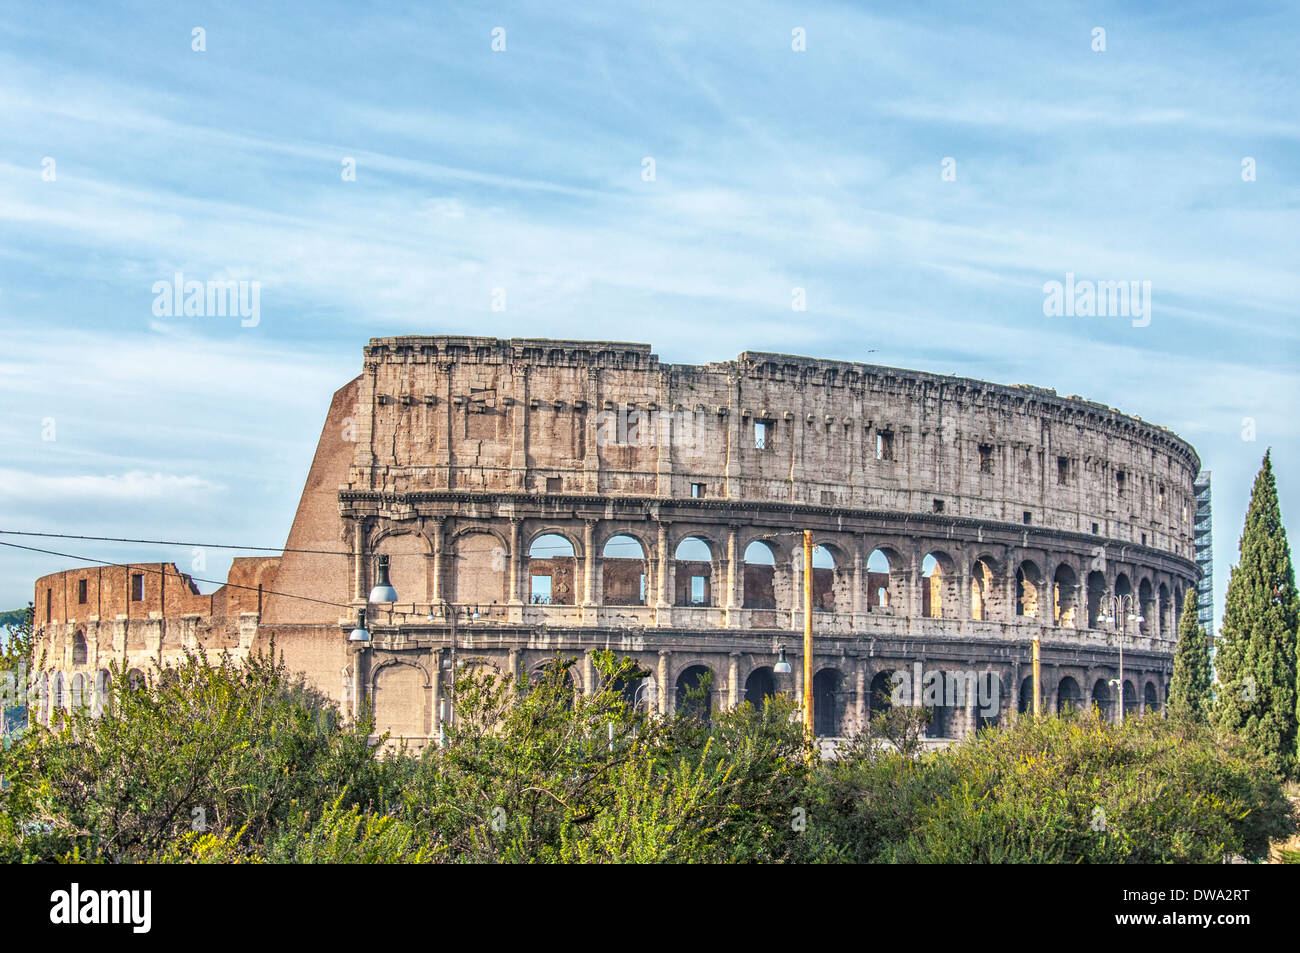 The ancient ruin of the Roman Colosseum amphitheater situated in the Italien capital of Rome. Stock Photo